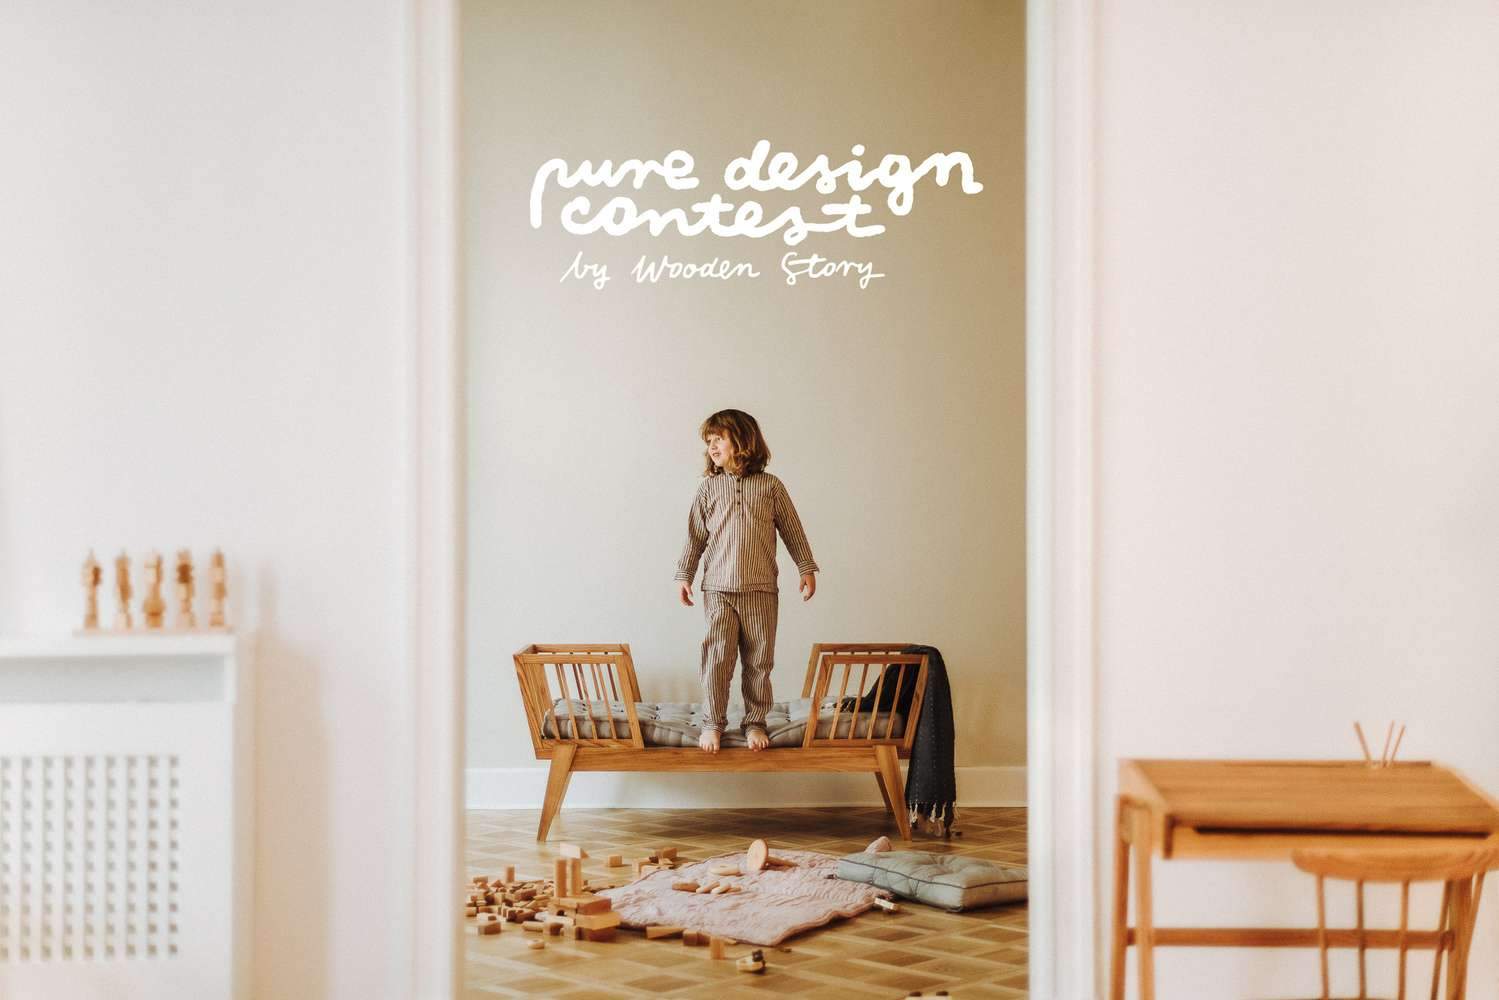 PURE DESIGN CONTEST by Wooden Story : Call for Submissions